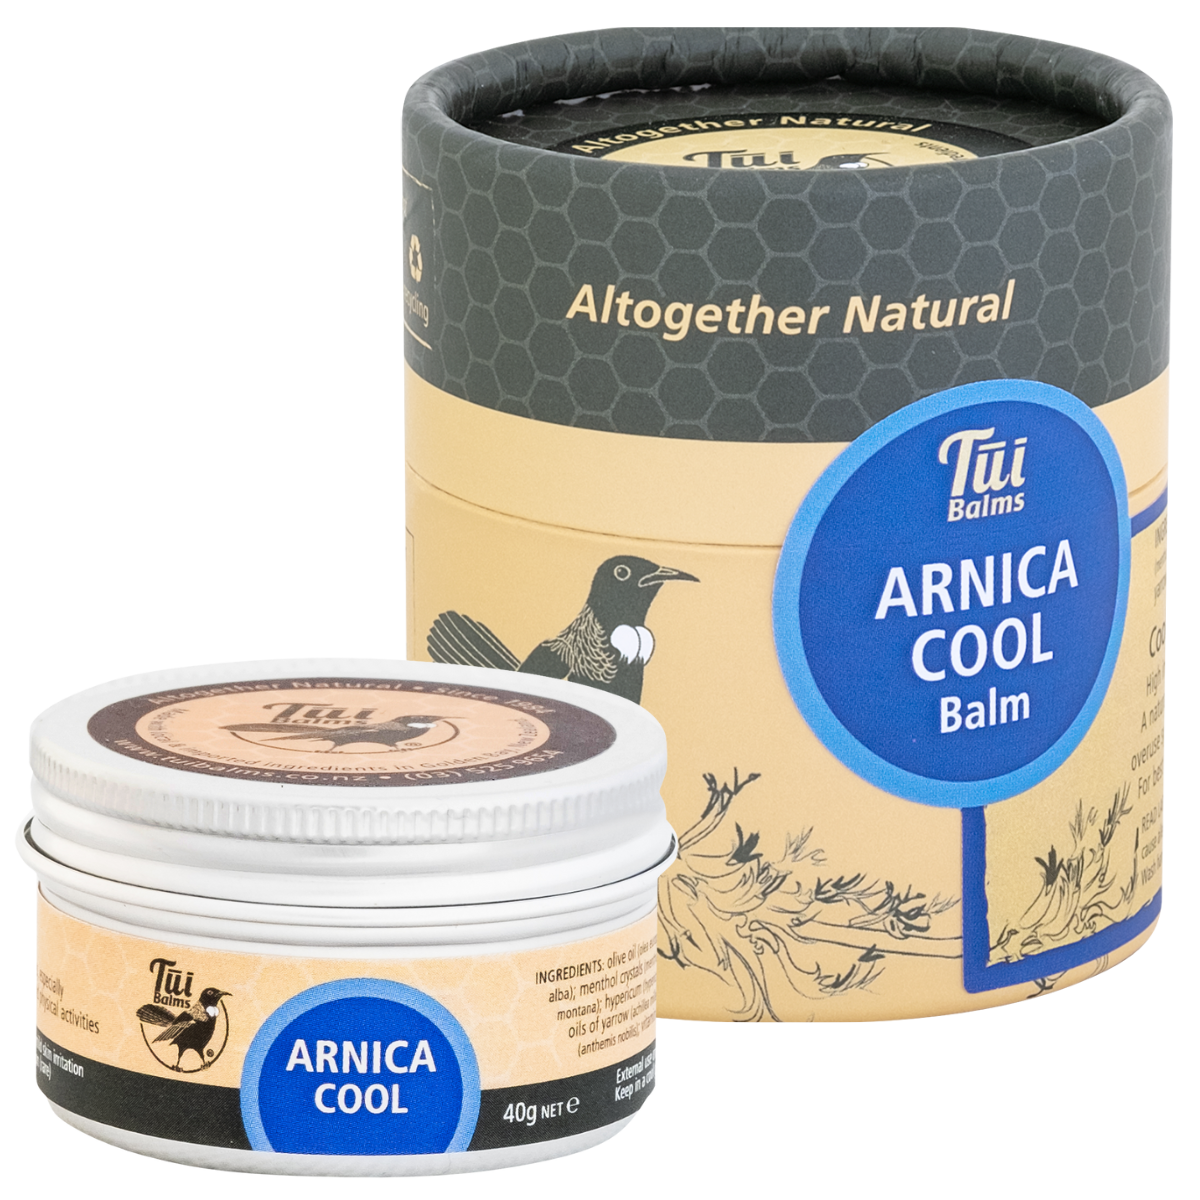 Tui Balms -  Arnica Cool Balm - Cooling & Soothing